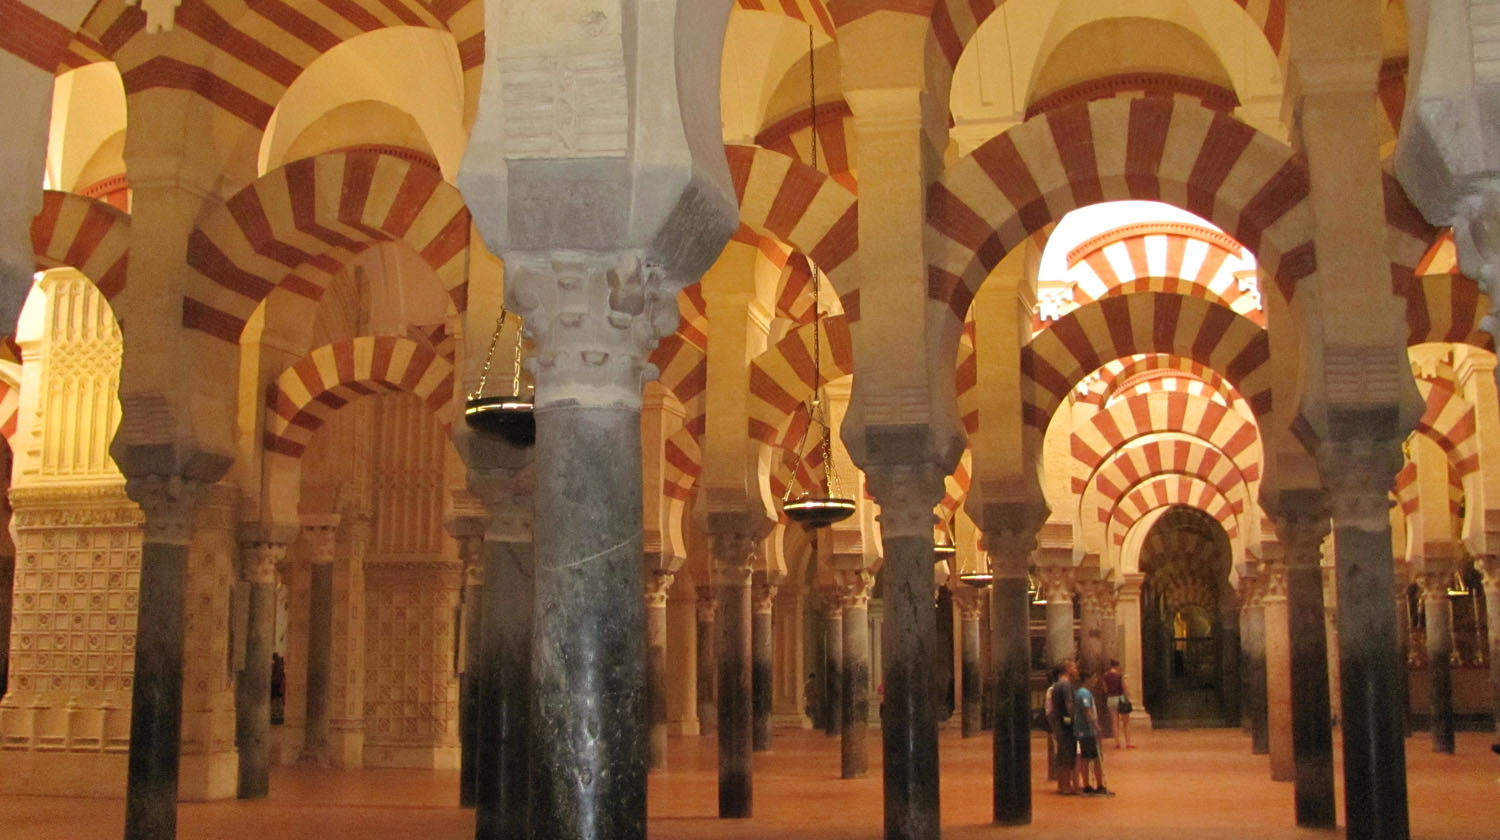 Another view inside the Mesquita.jpg